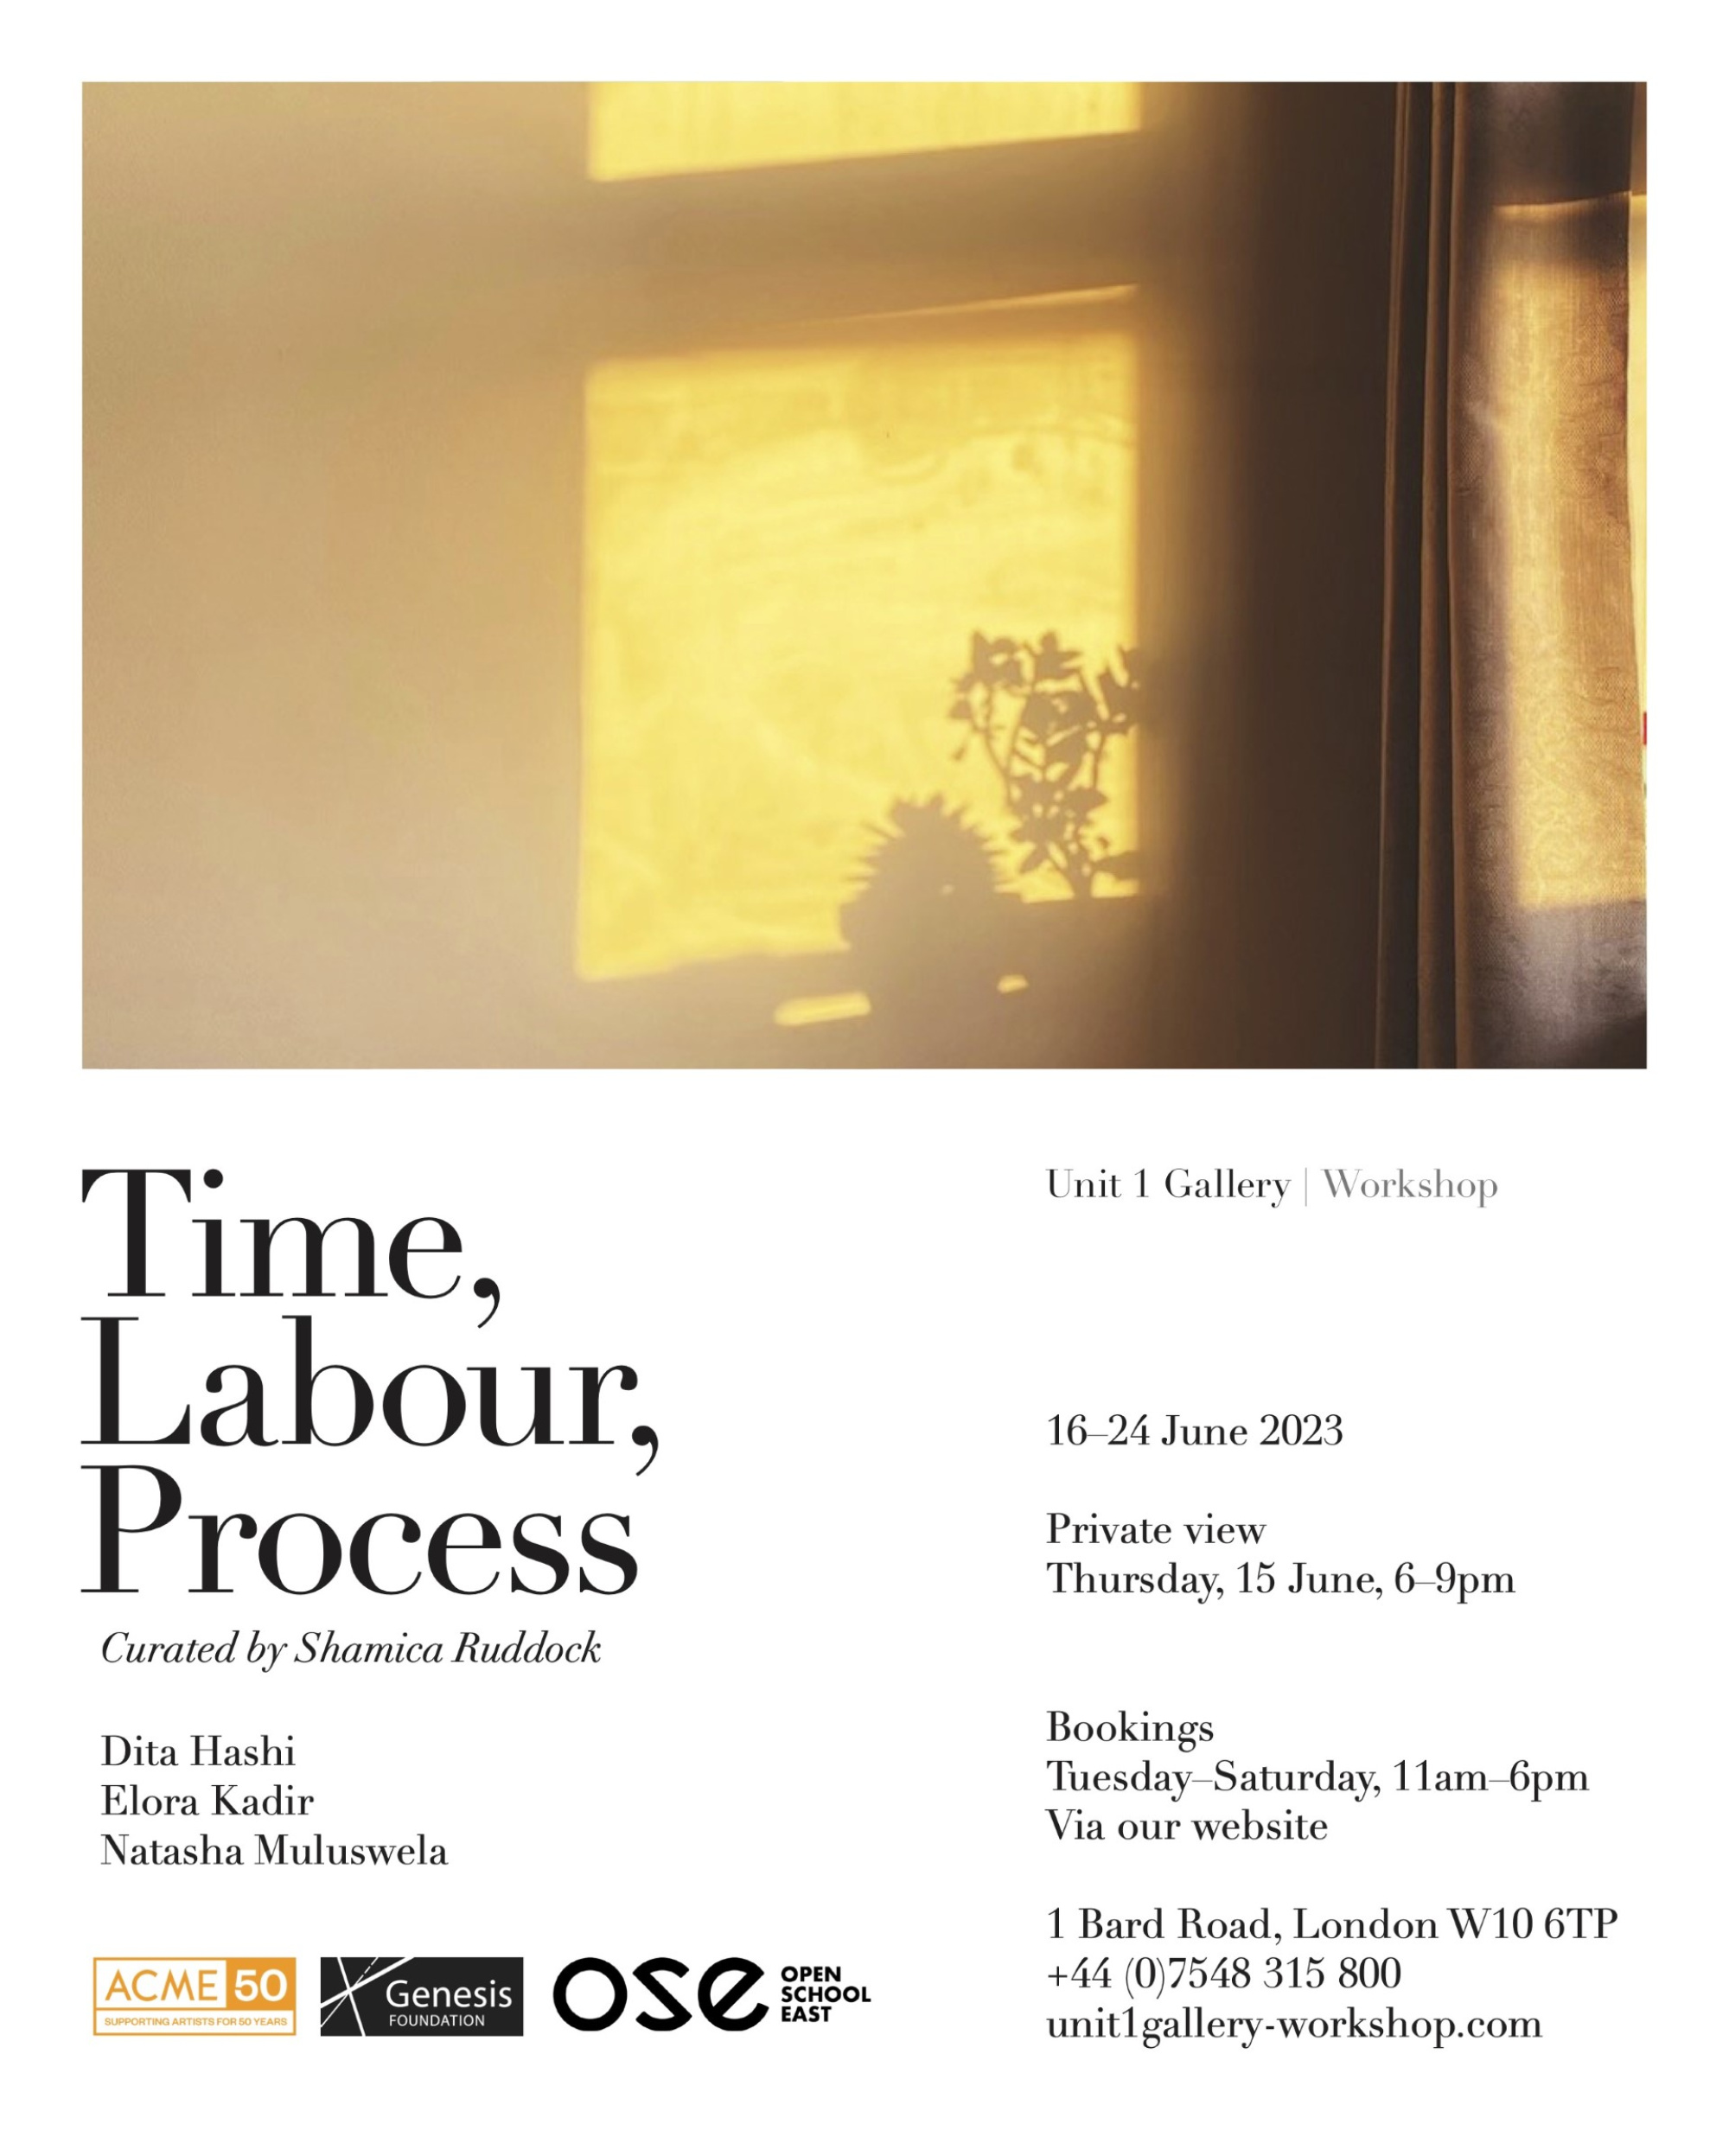 Poster for Time, Labour, Process at Unit 1 Gallery